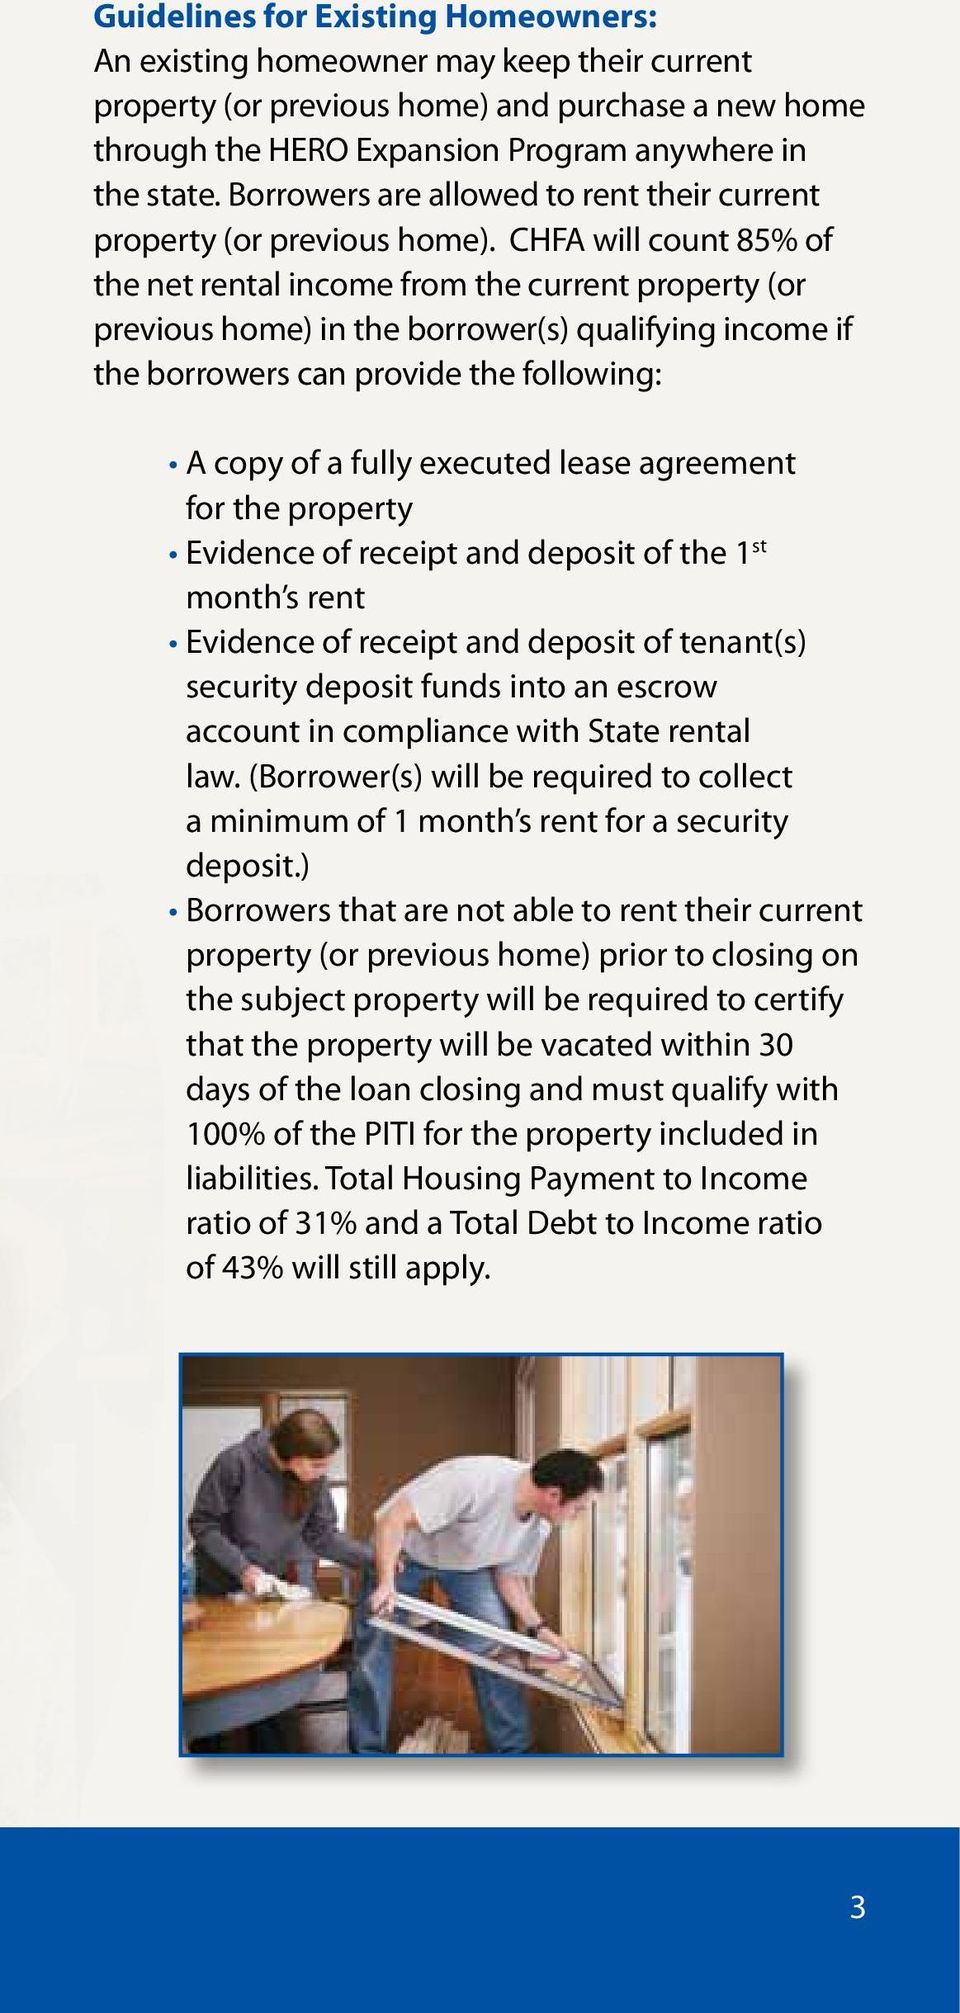 CHFA will count 85% of the net rental income from the current property (or previous home) in the borrower(s) qualifying income if the borrowers can provide the following: A copy of a fully executed